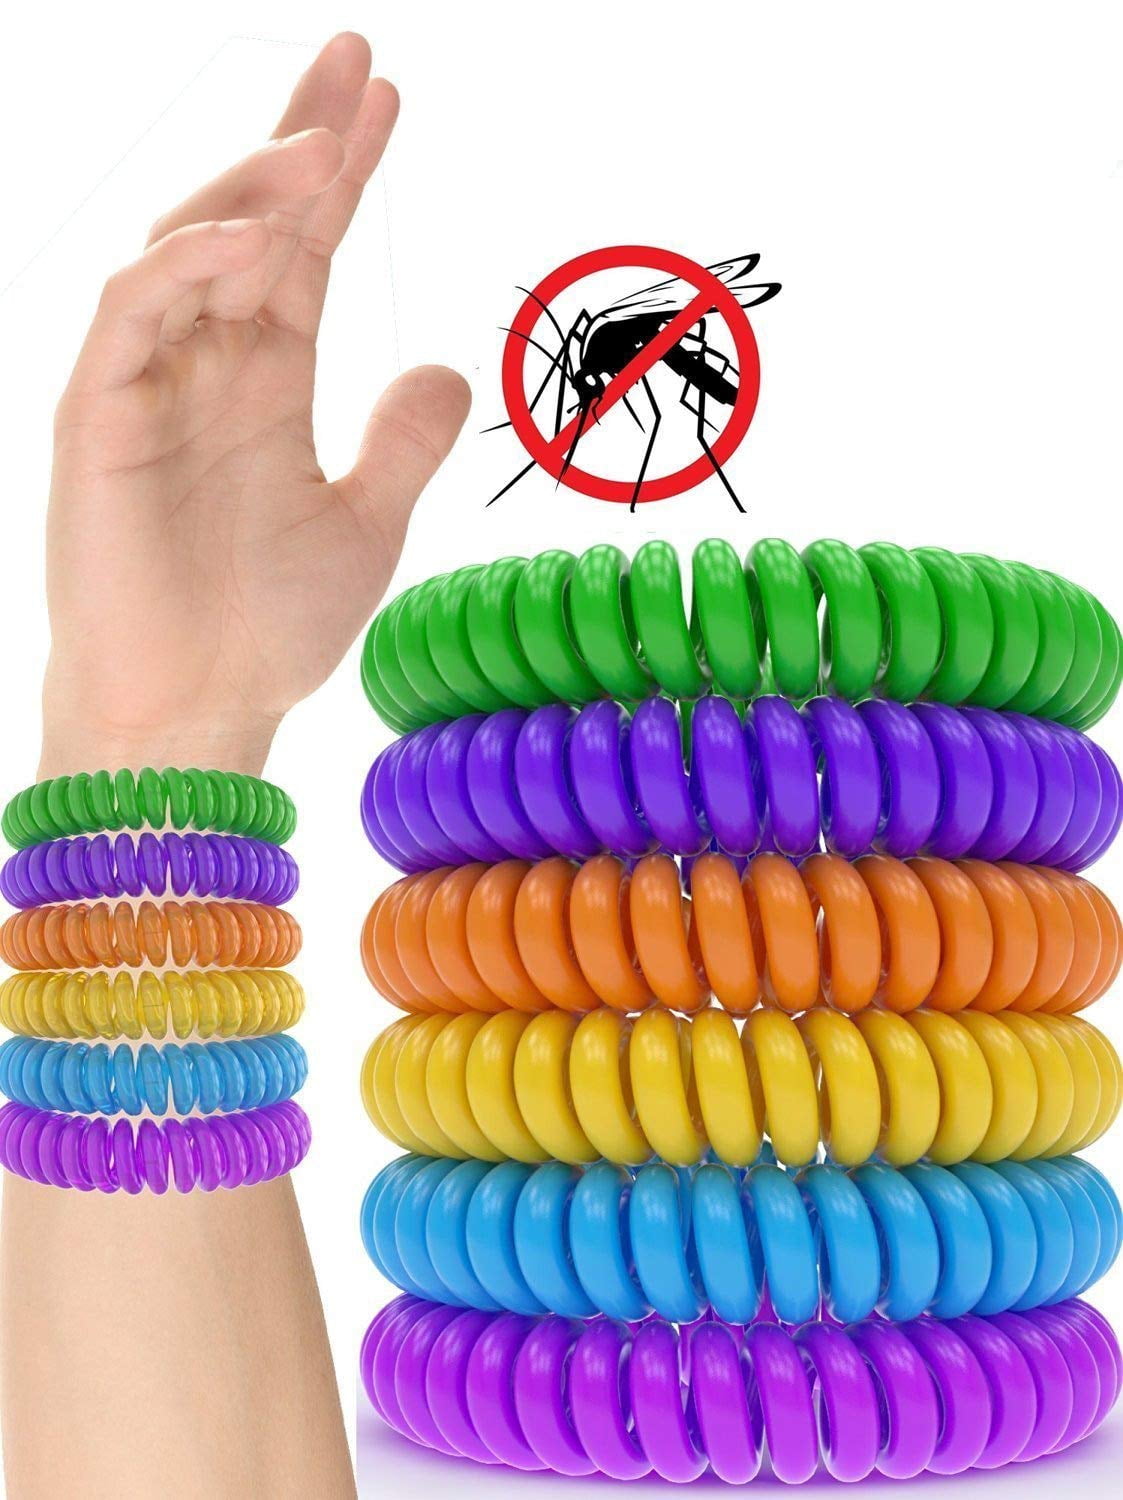 10-Pack Natural Mosquito Repellent Bracelet Wrist Band Bug Insect Protection USA 